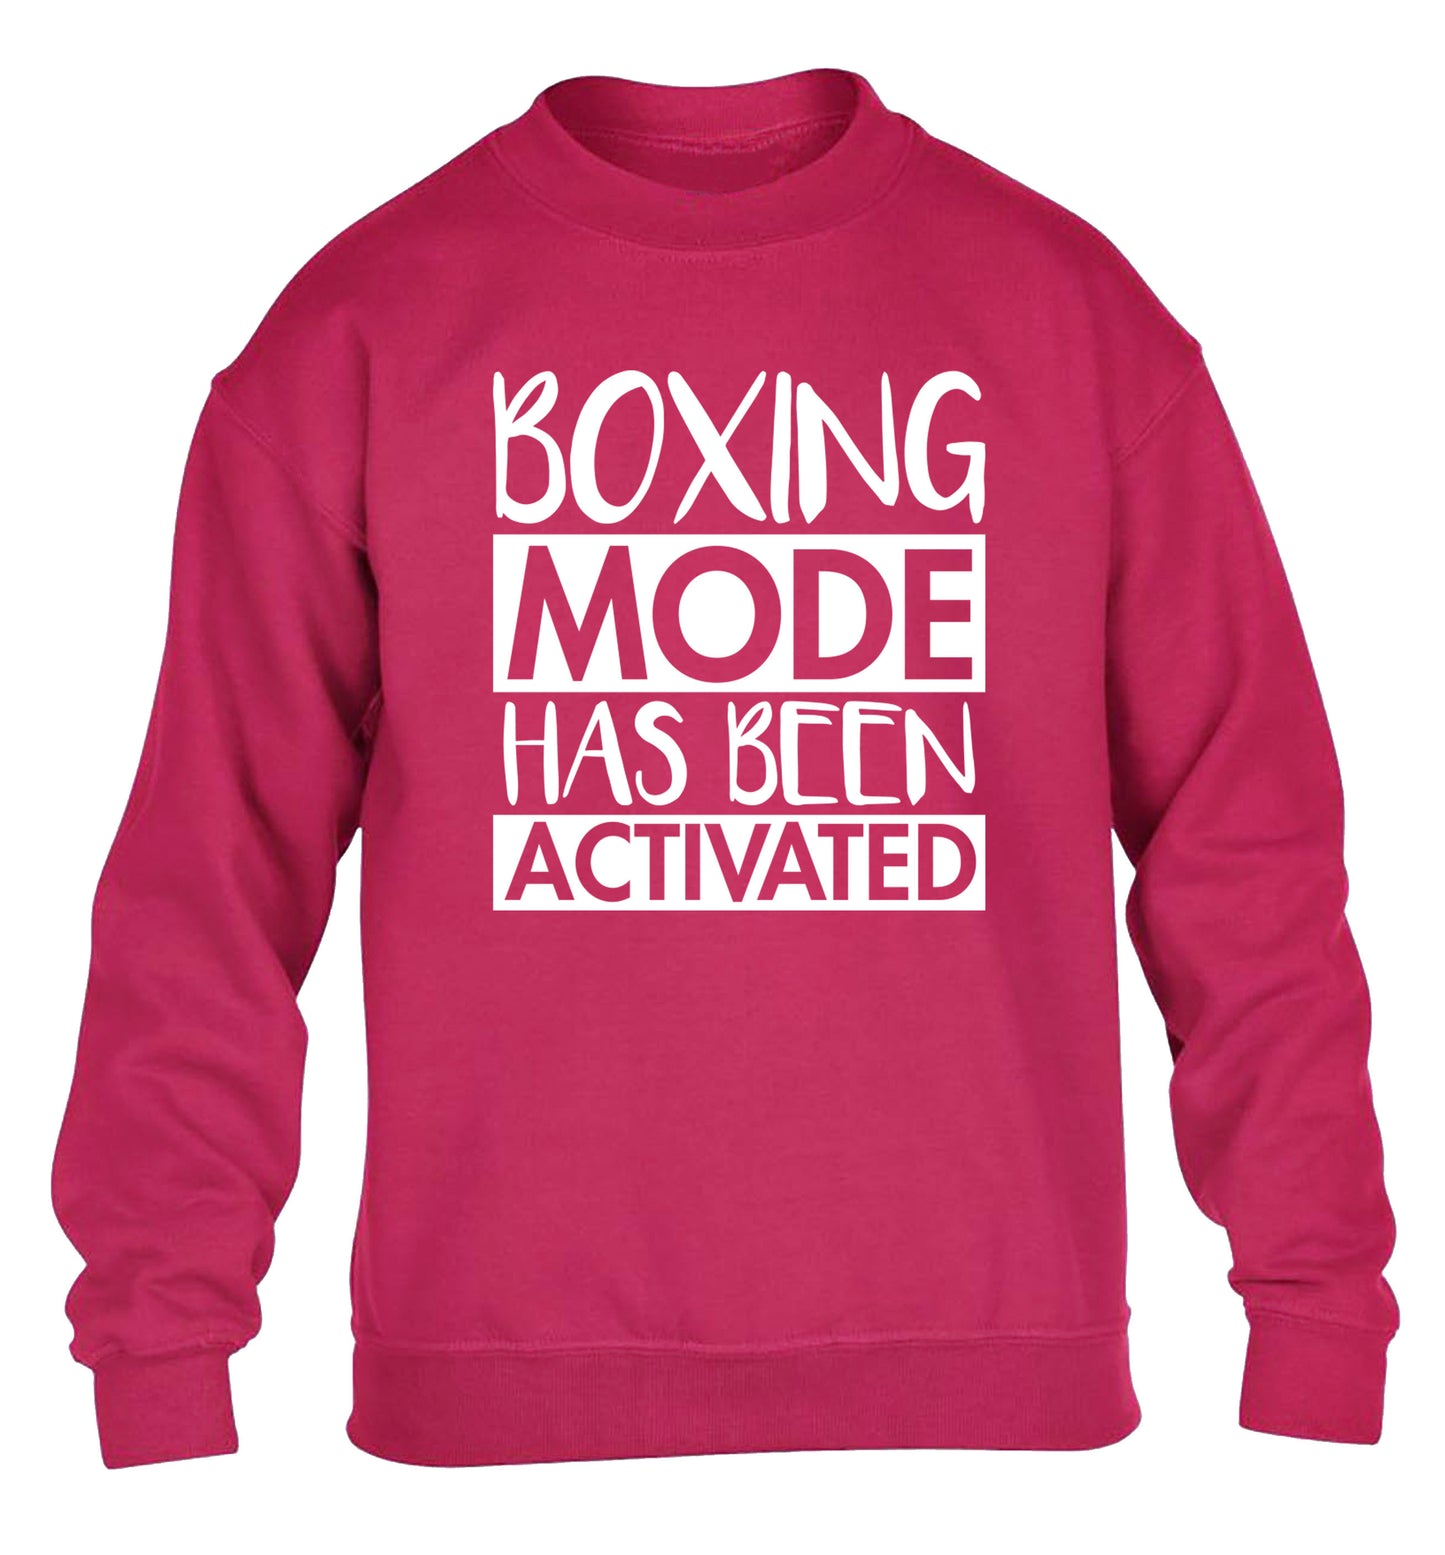 Boxing mode activated children's pink sweater 12-14 Years